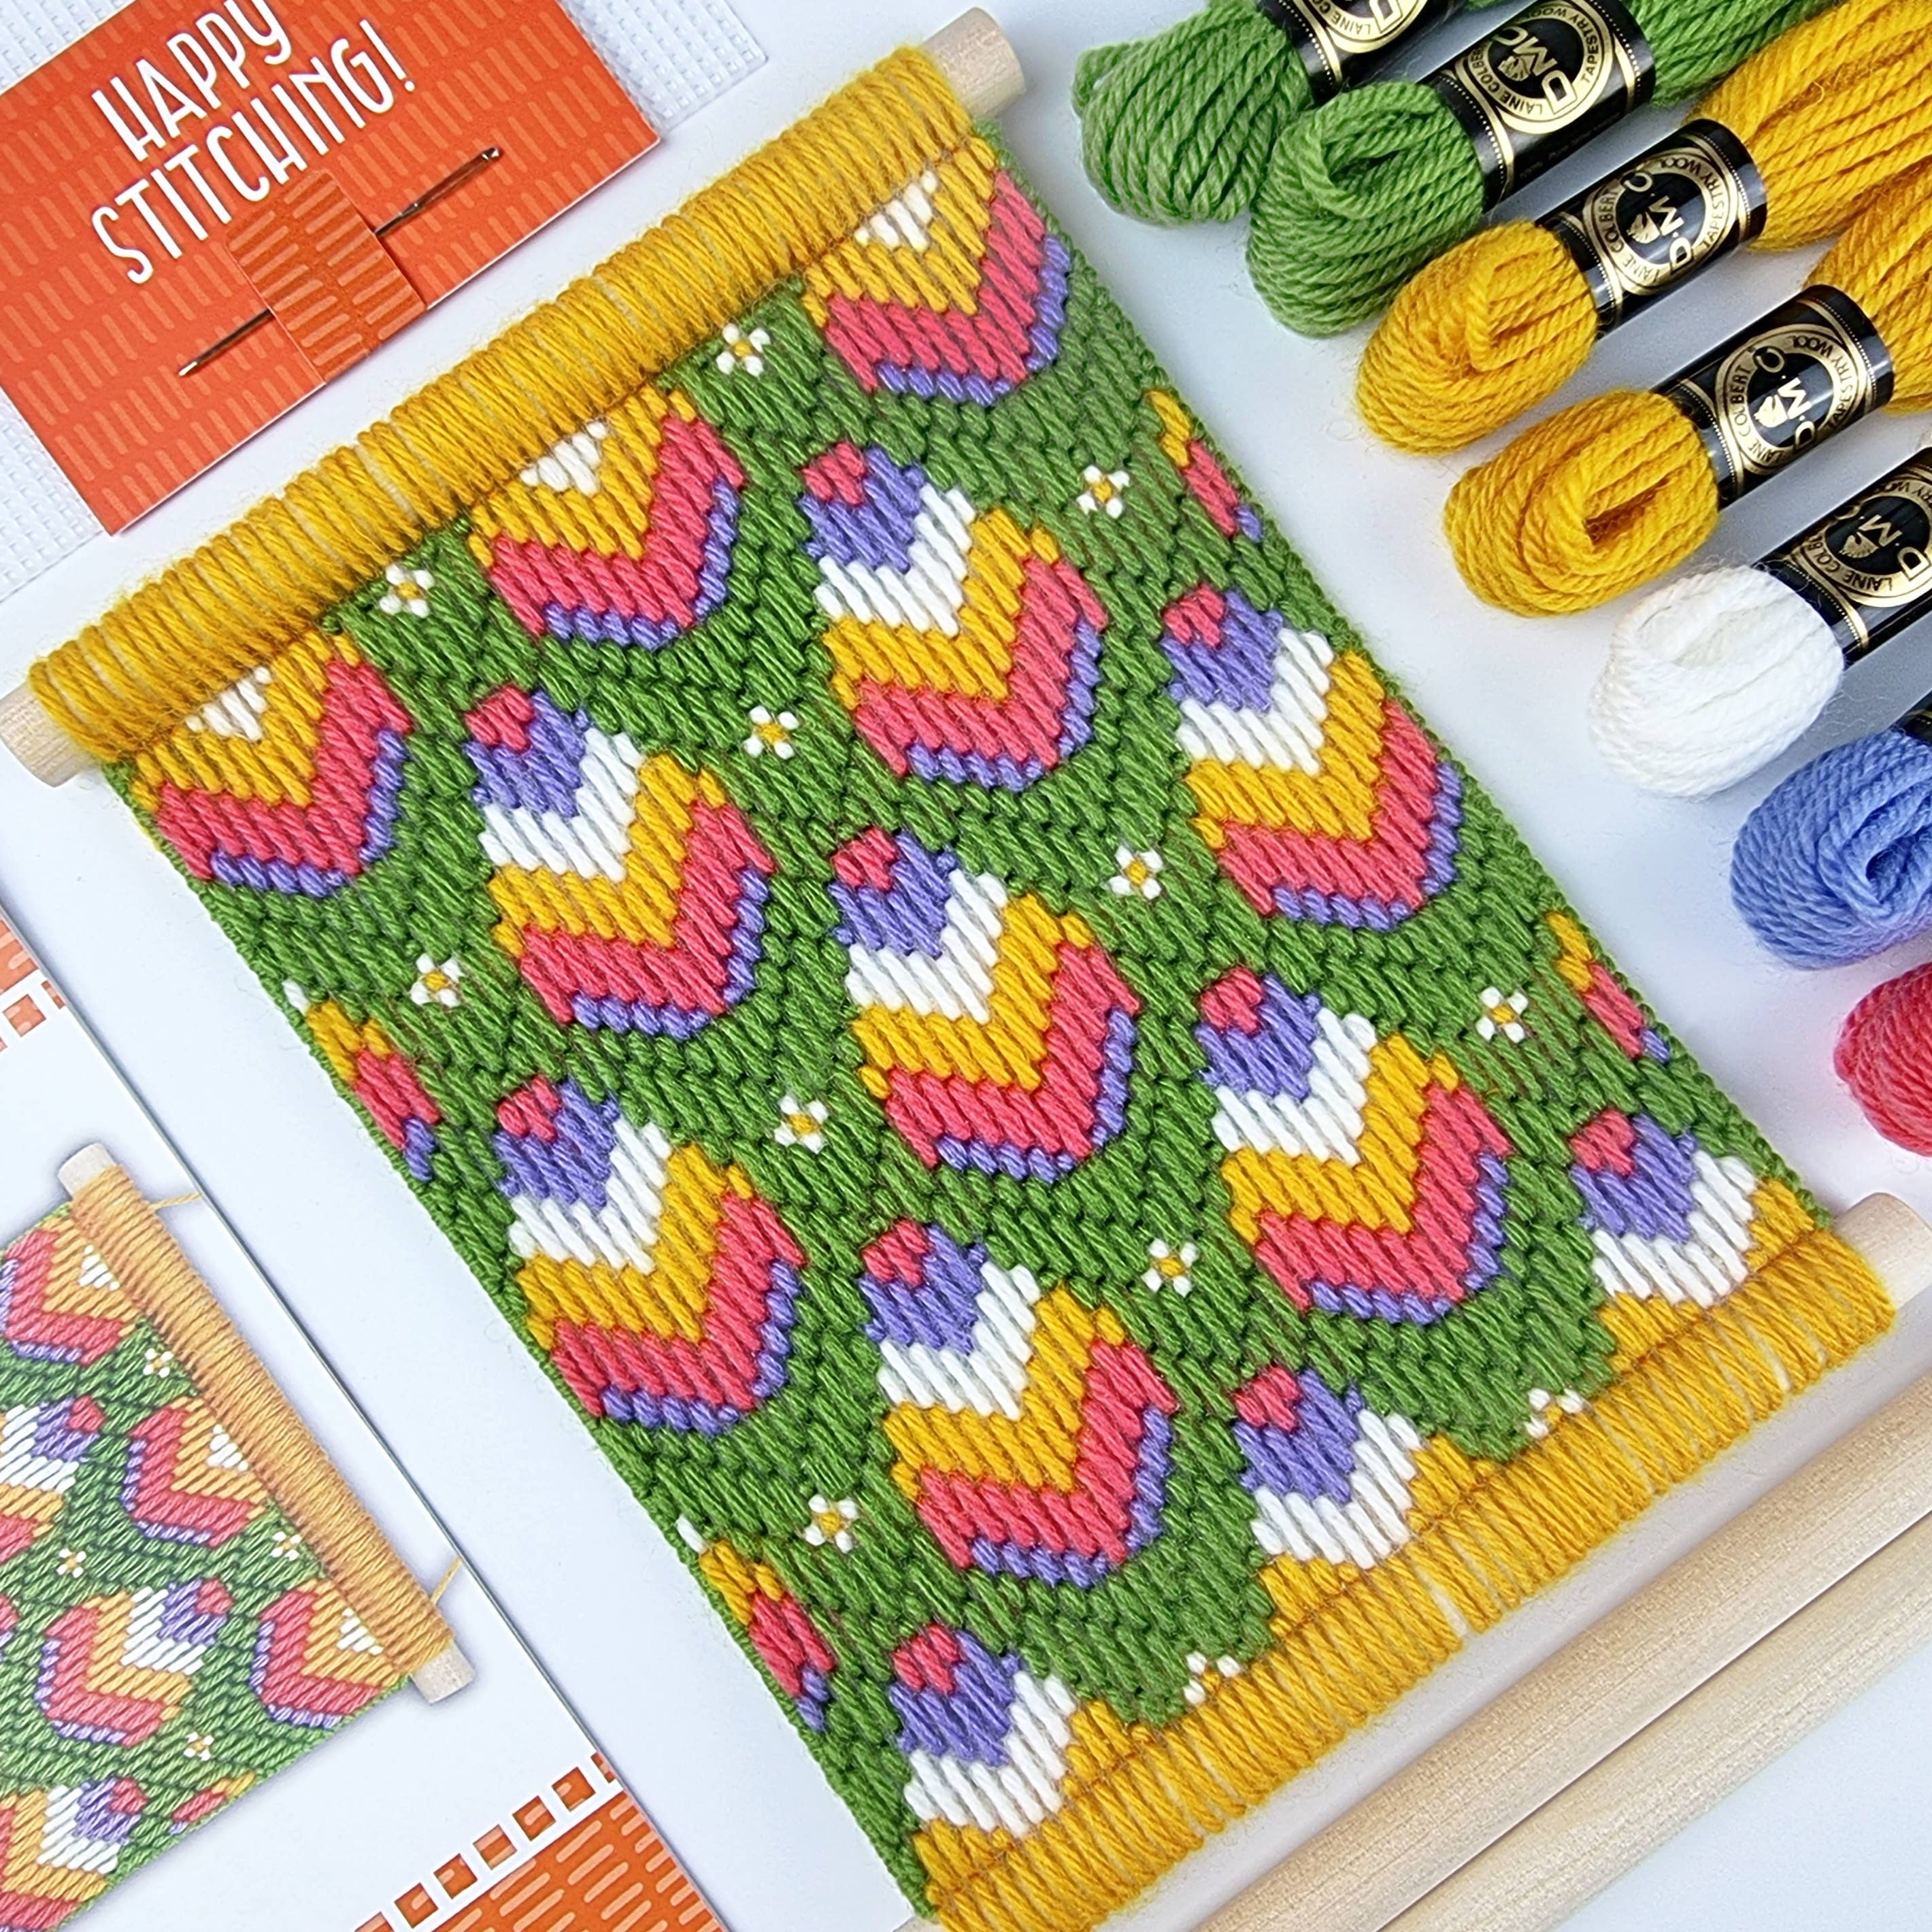 Bargello Needlepoint Kit - Easter Egg Wall Hanging - Stitched Modern